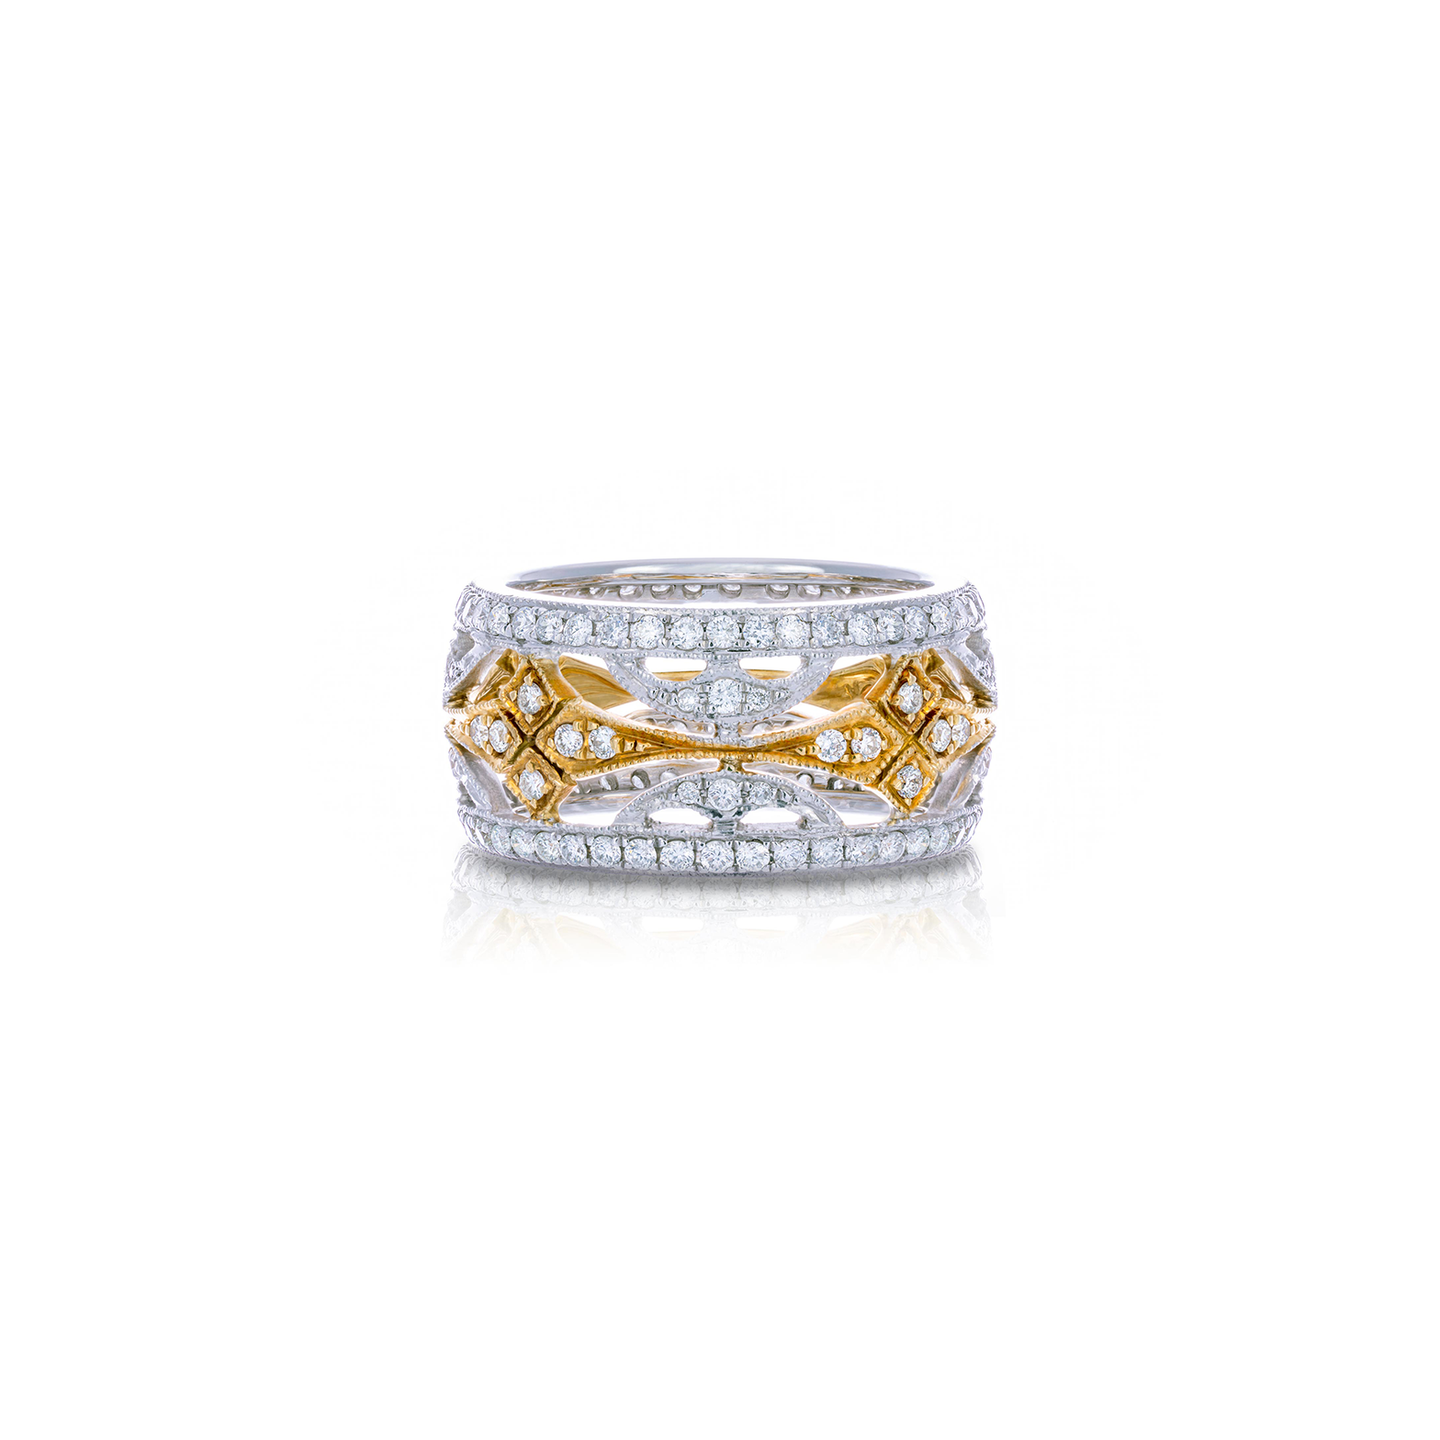 Sabel Collection Mixed Metals Round Diamond Filagree Band